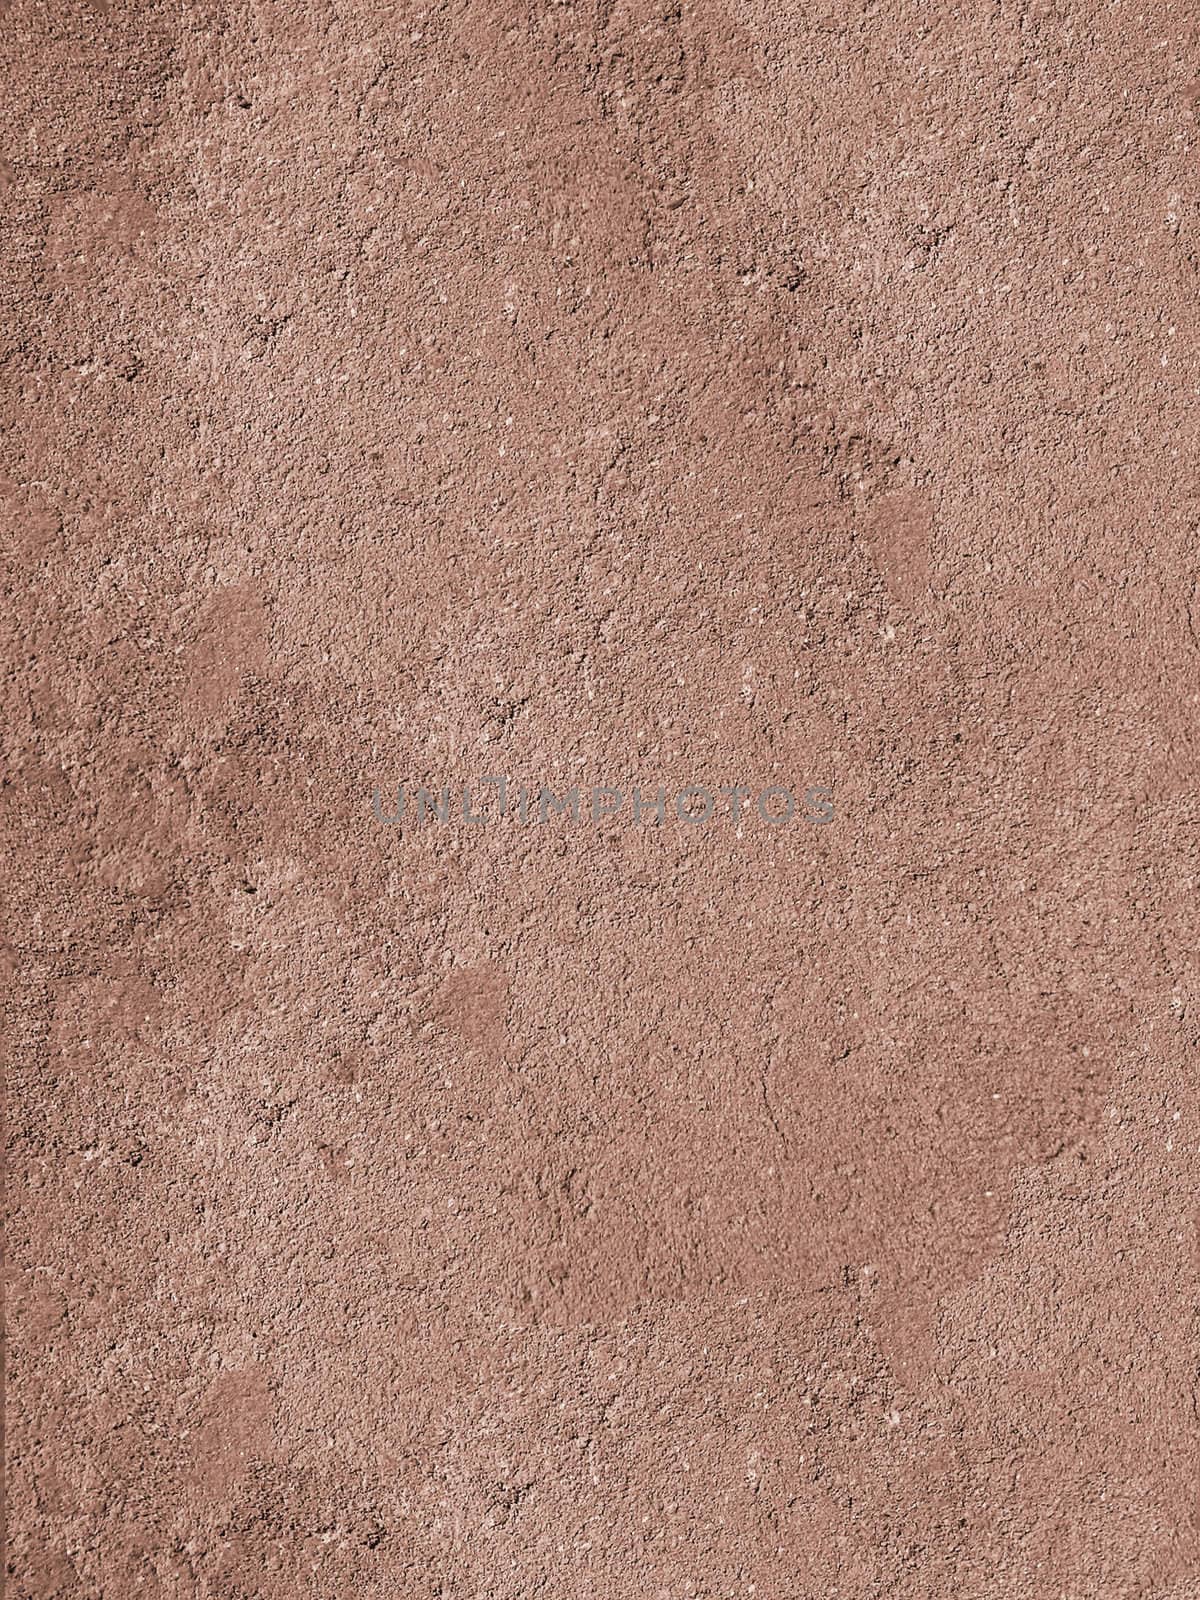 Brown cement plaster as a background          